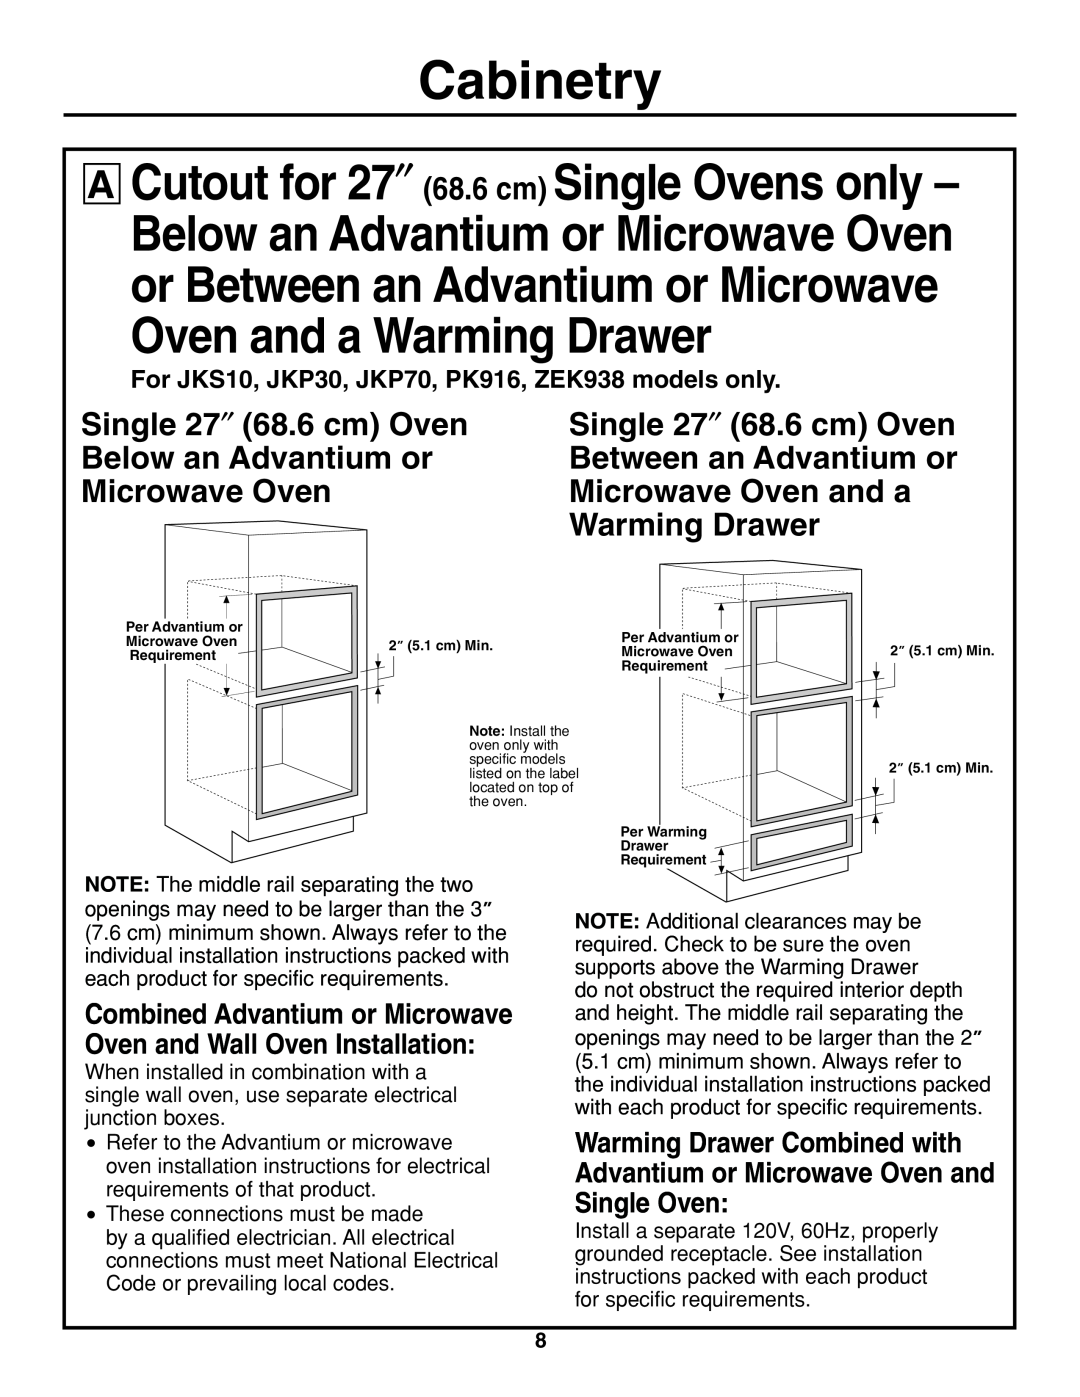 GE r08654v-1 Cutout for 27″ 68.6 cm Single Ovens only, Single 27″ 68.6 cm Oven, Below an Advantium or, Microwave Oven 